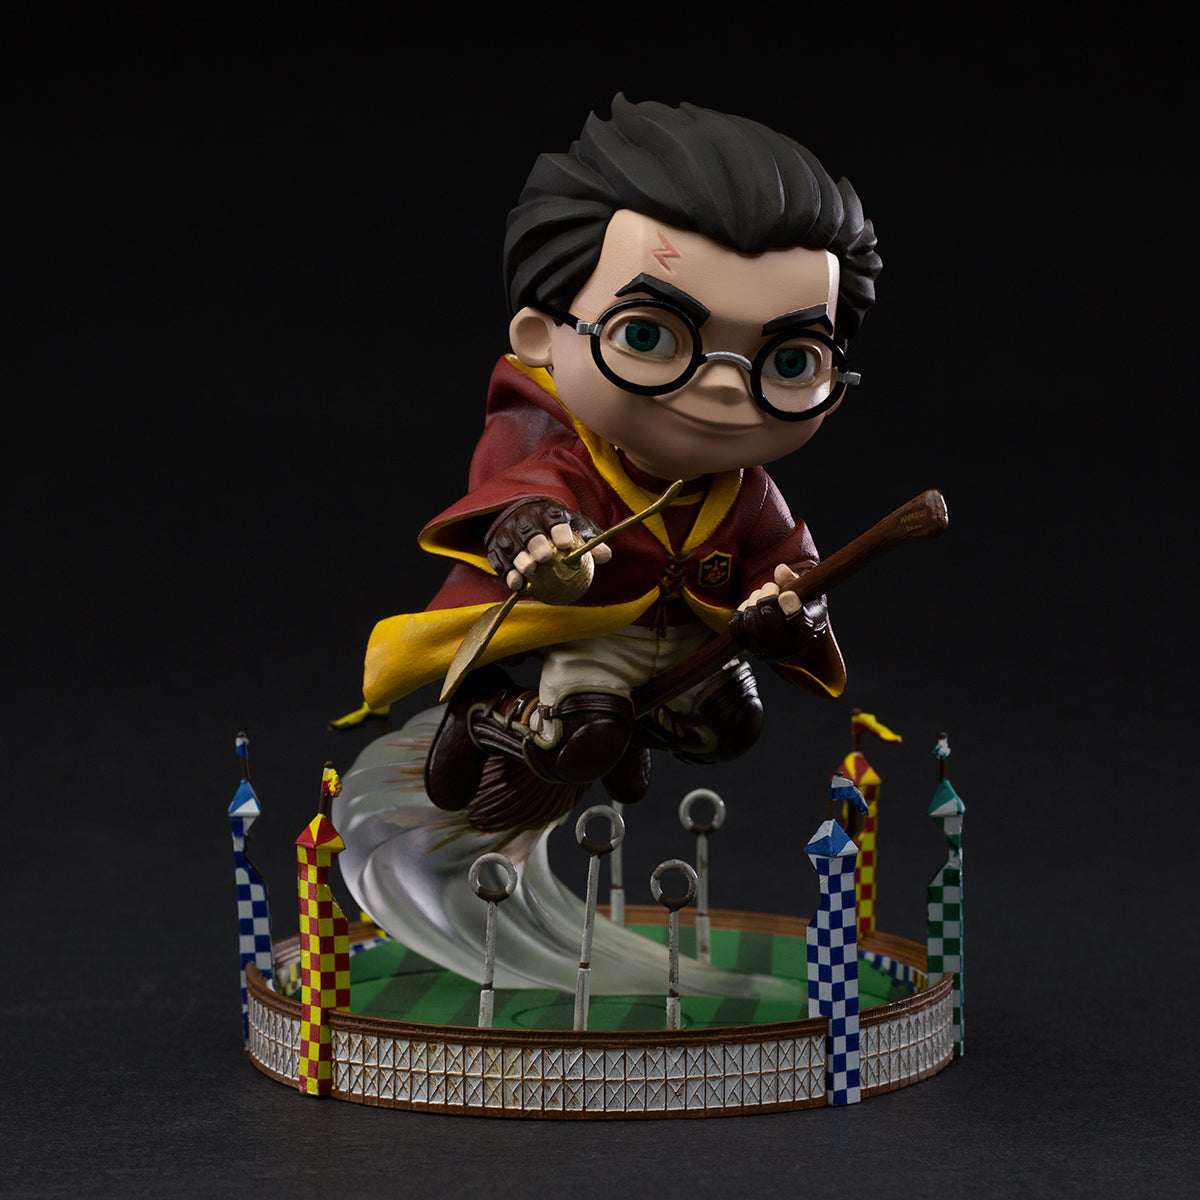 Harry Potter At The Quidditch Match Minico Figure By Iron Studios (Damaged Box) -MiniCo - India - www.superherotoystore.com